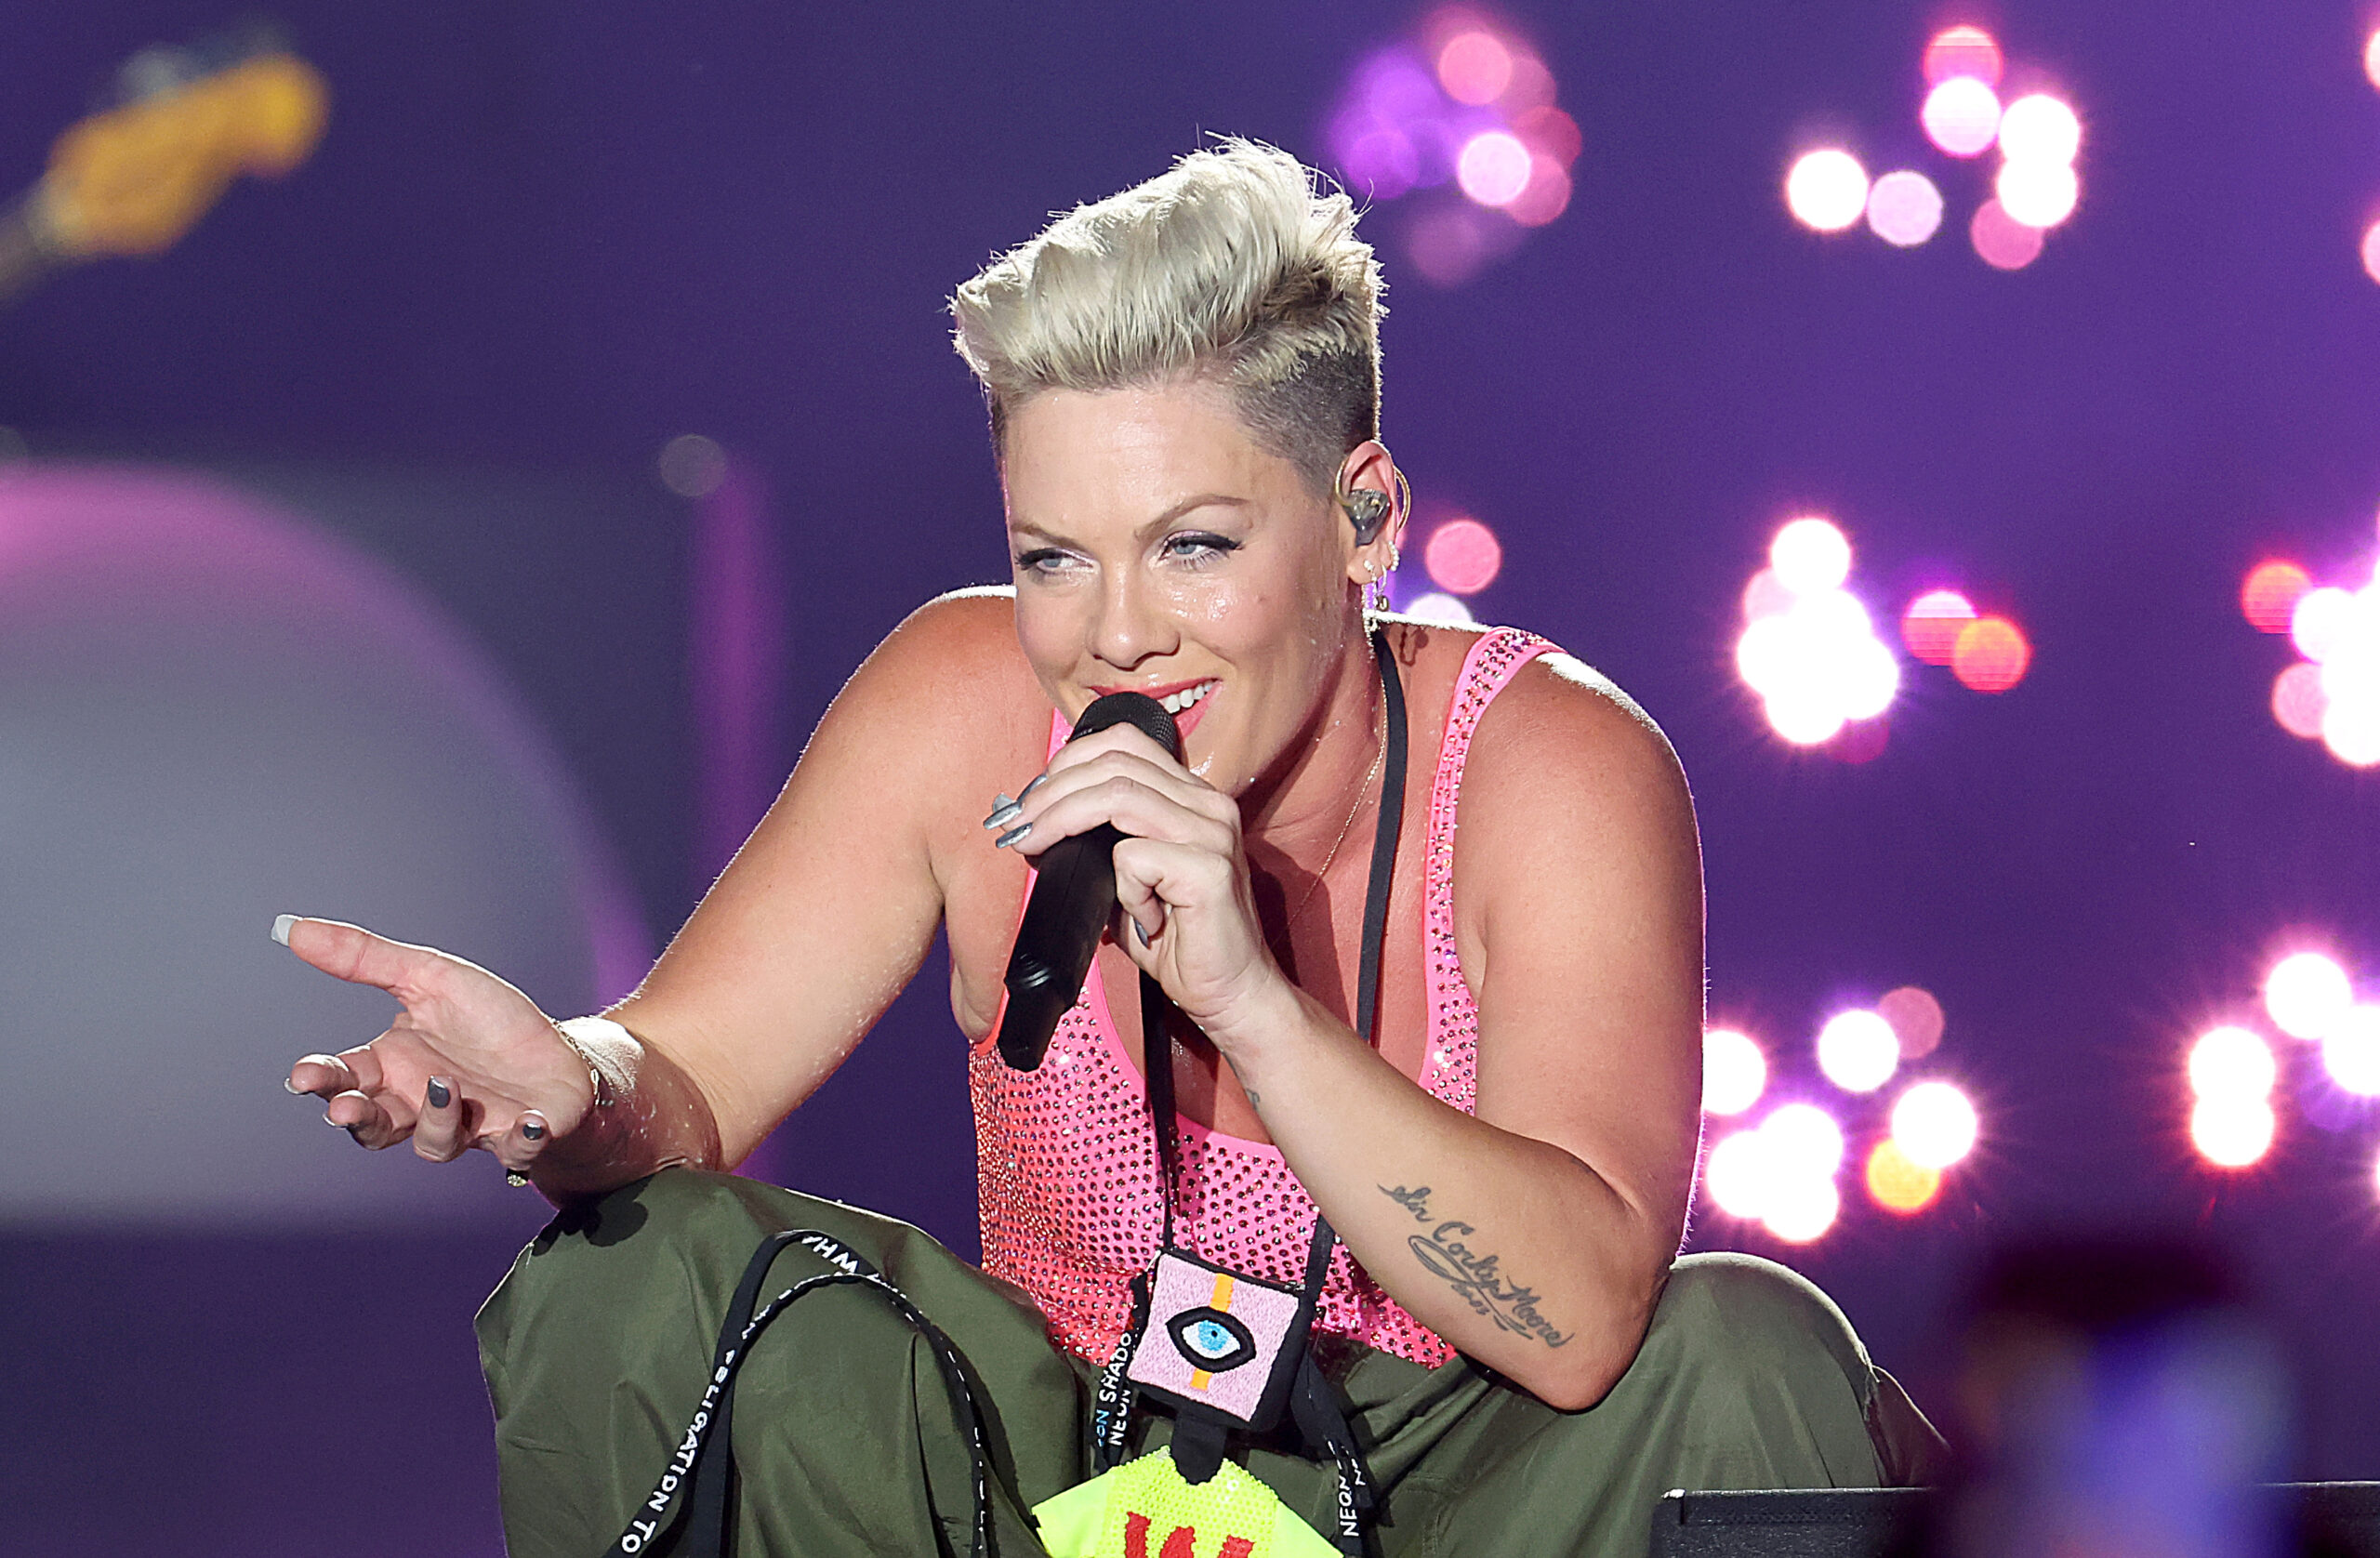 Woman in labor at Pink concert walks to hospital to deliver baby.